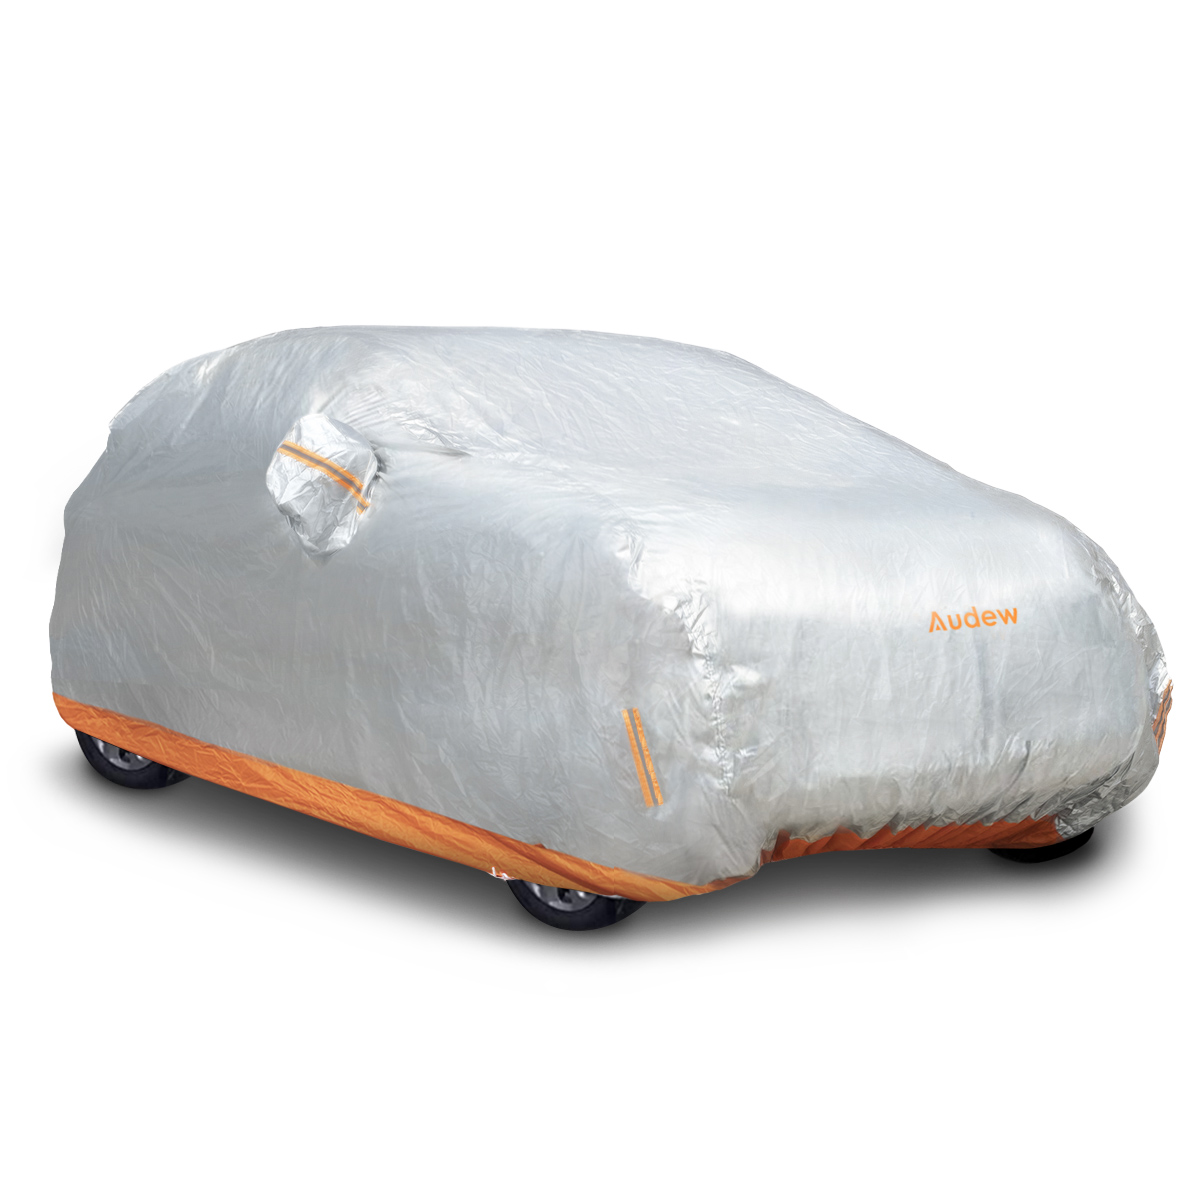 Find M/L/XL Audew 210D Oxford Fabric Car Cover Waterproof Tarp For All Weather Protection Adjustable Straps & Reflective Strips for Sale on Gipsybee.com with cryptocurrencies